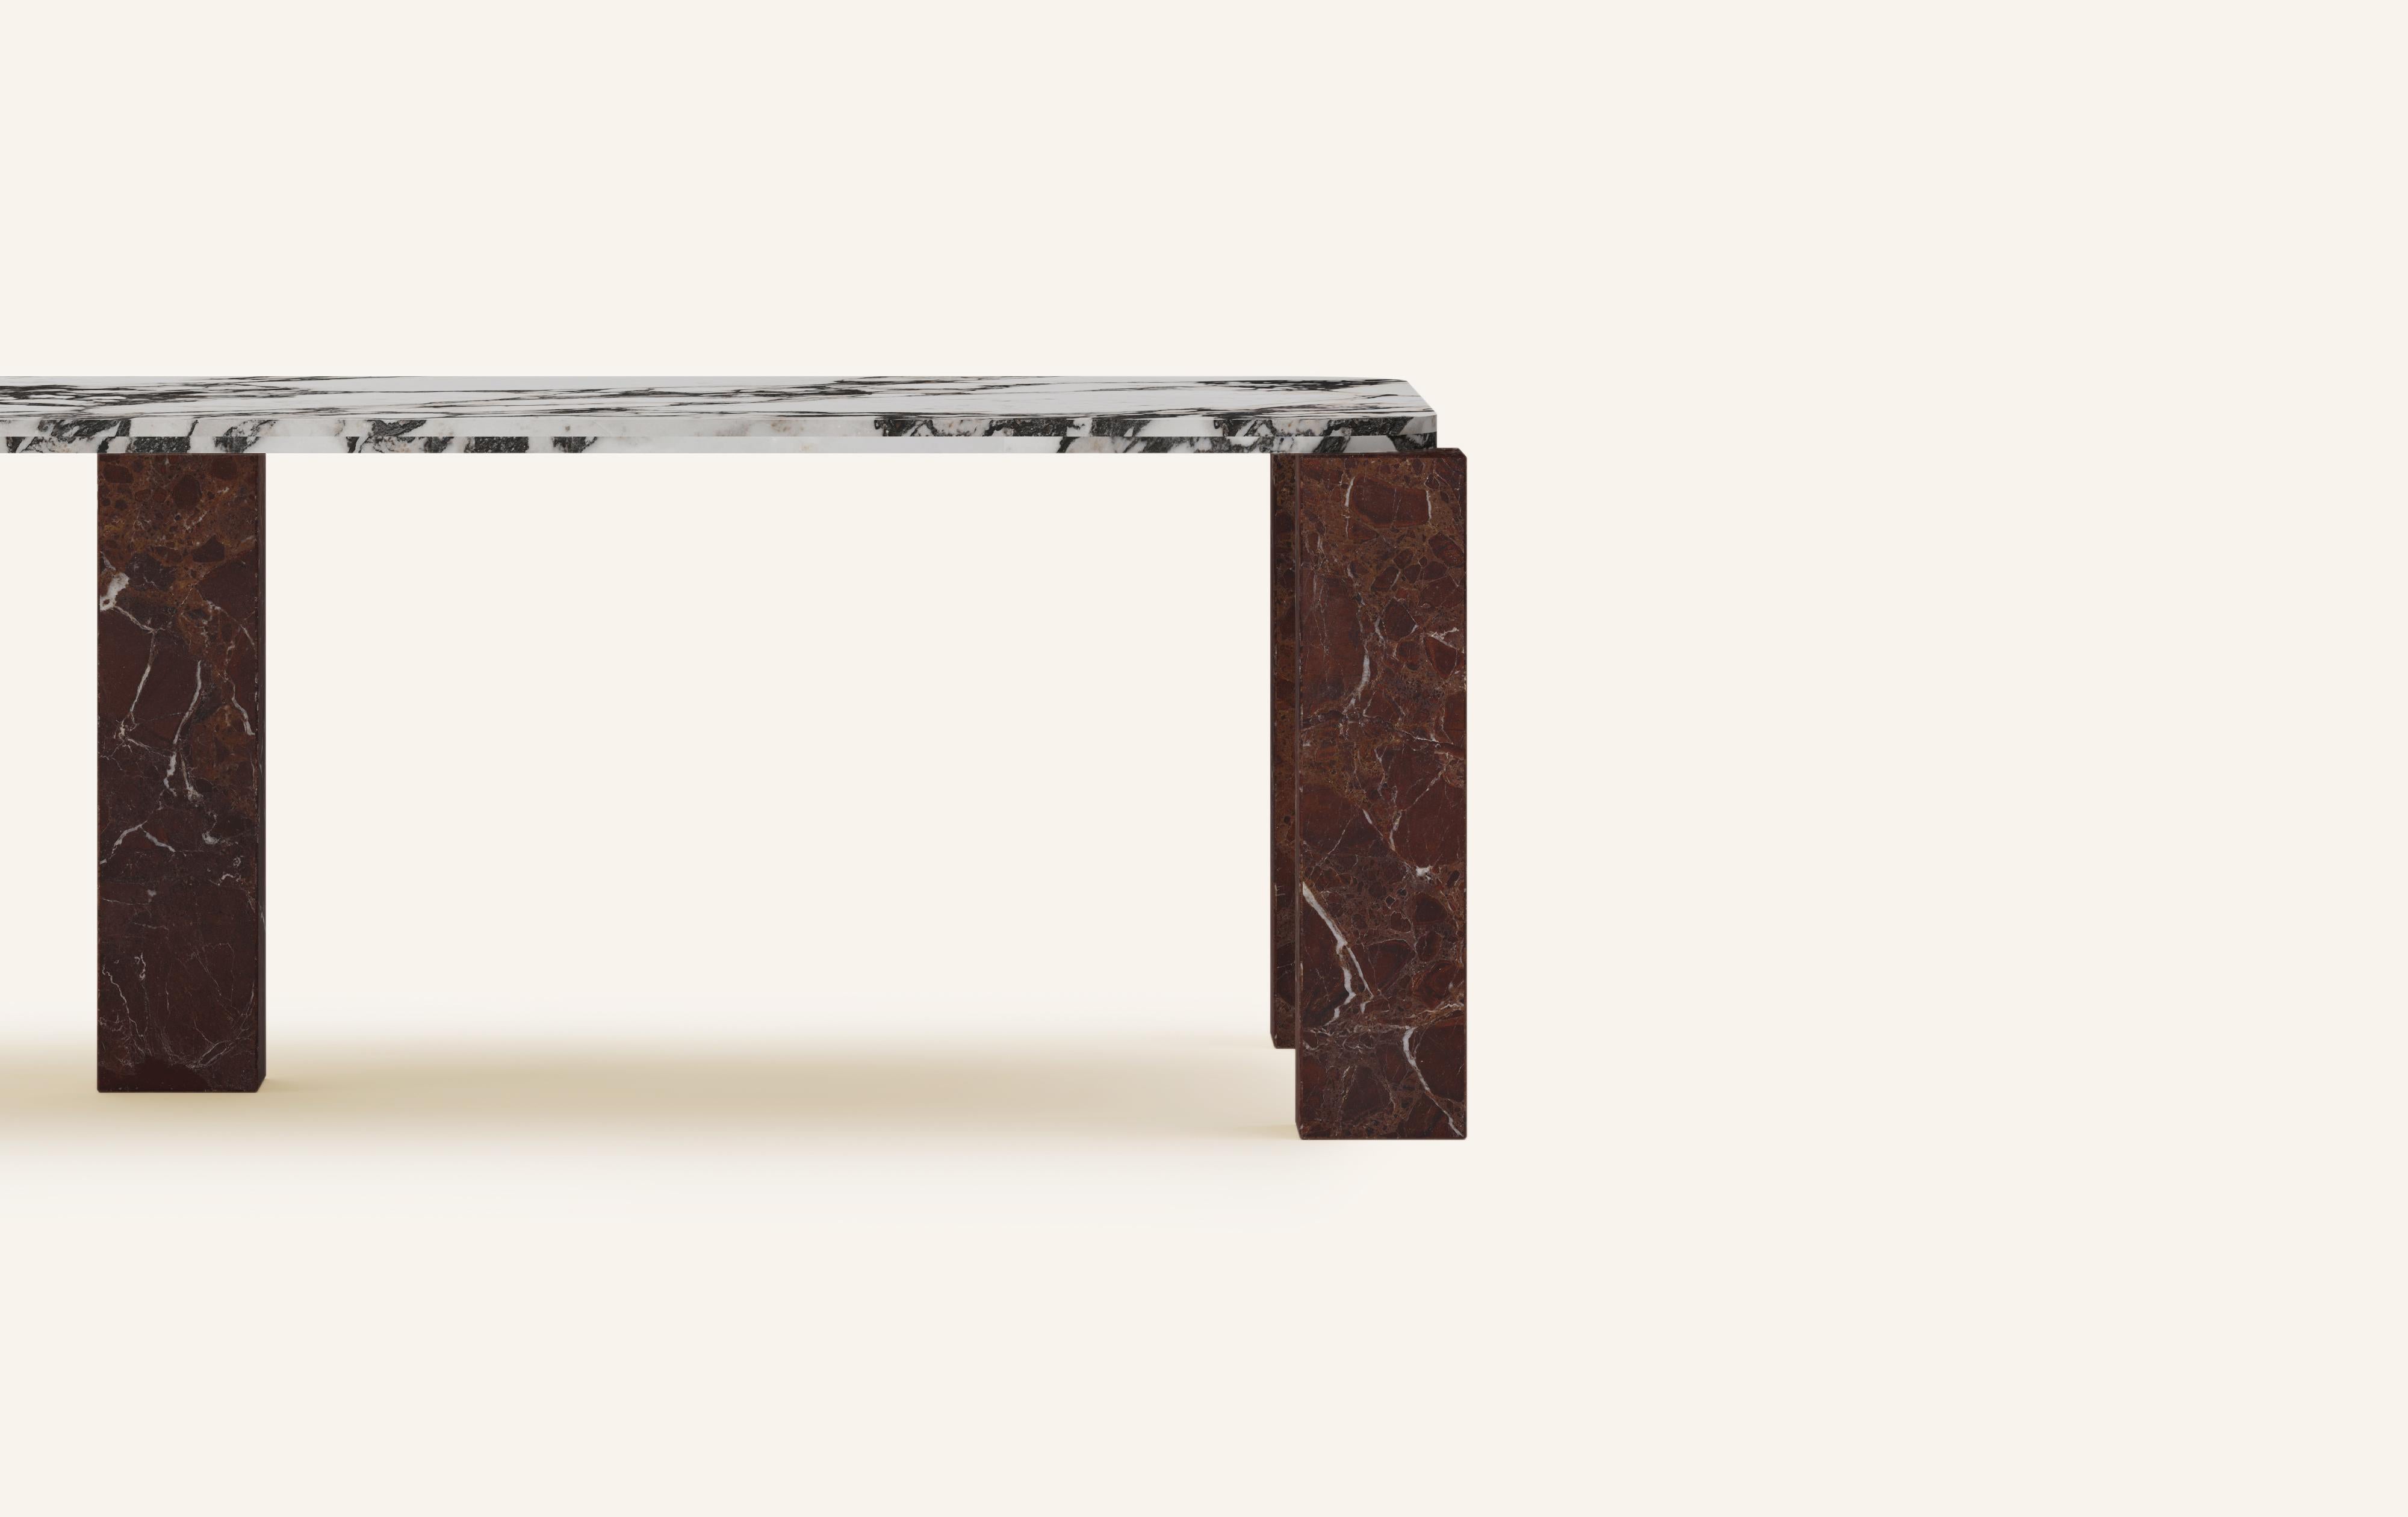 American FORM(LA) Cubo Rectangle Dining Table 120”L x 50”W x 30”H Viola & Rosso Marble For Sale